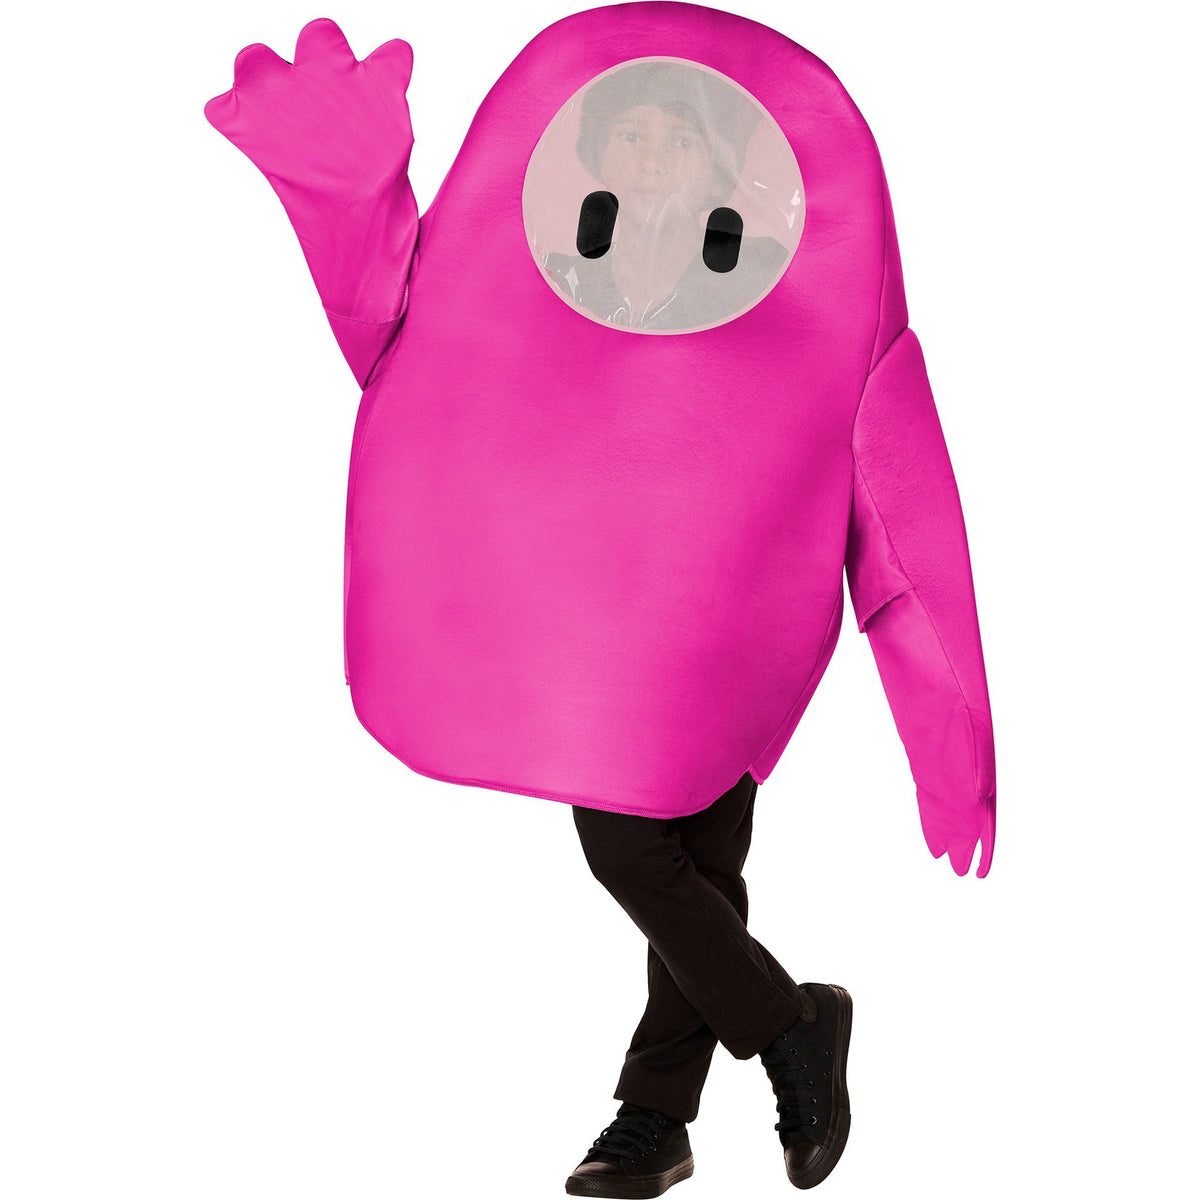 IN SPIRIT DESIGNS Costumes Fall Guys Pink Costume for Kids, Pink Tunic